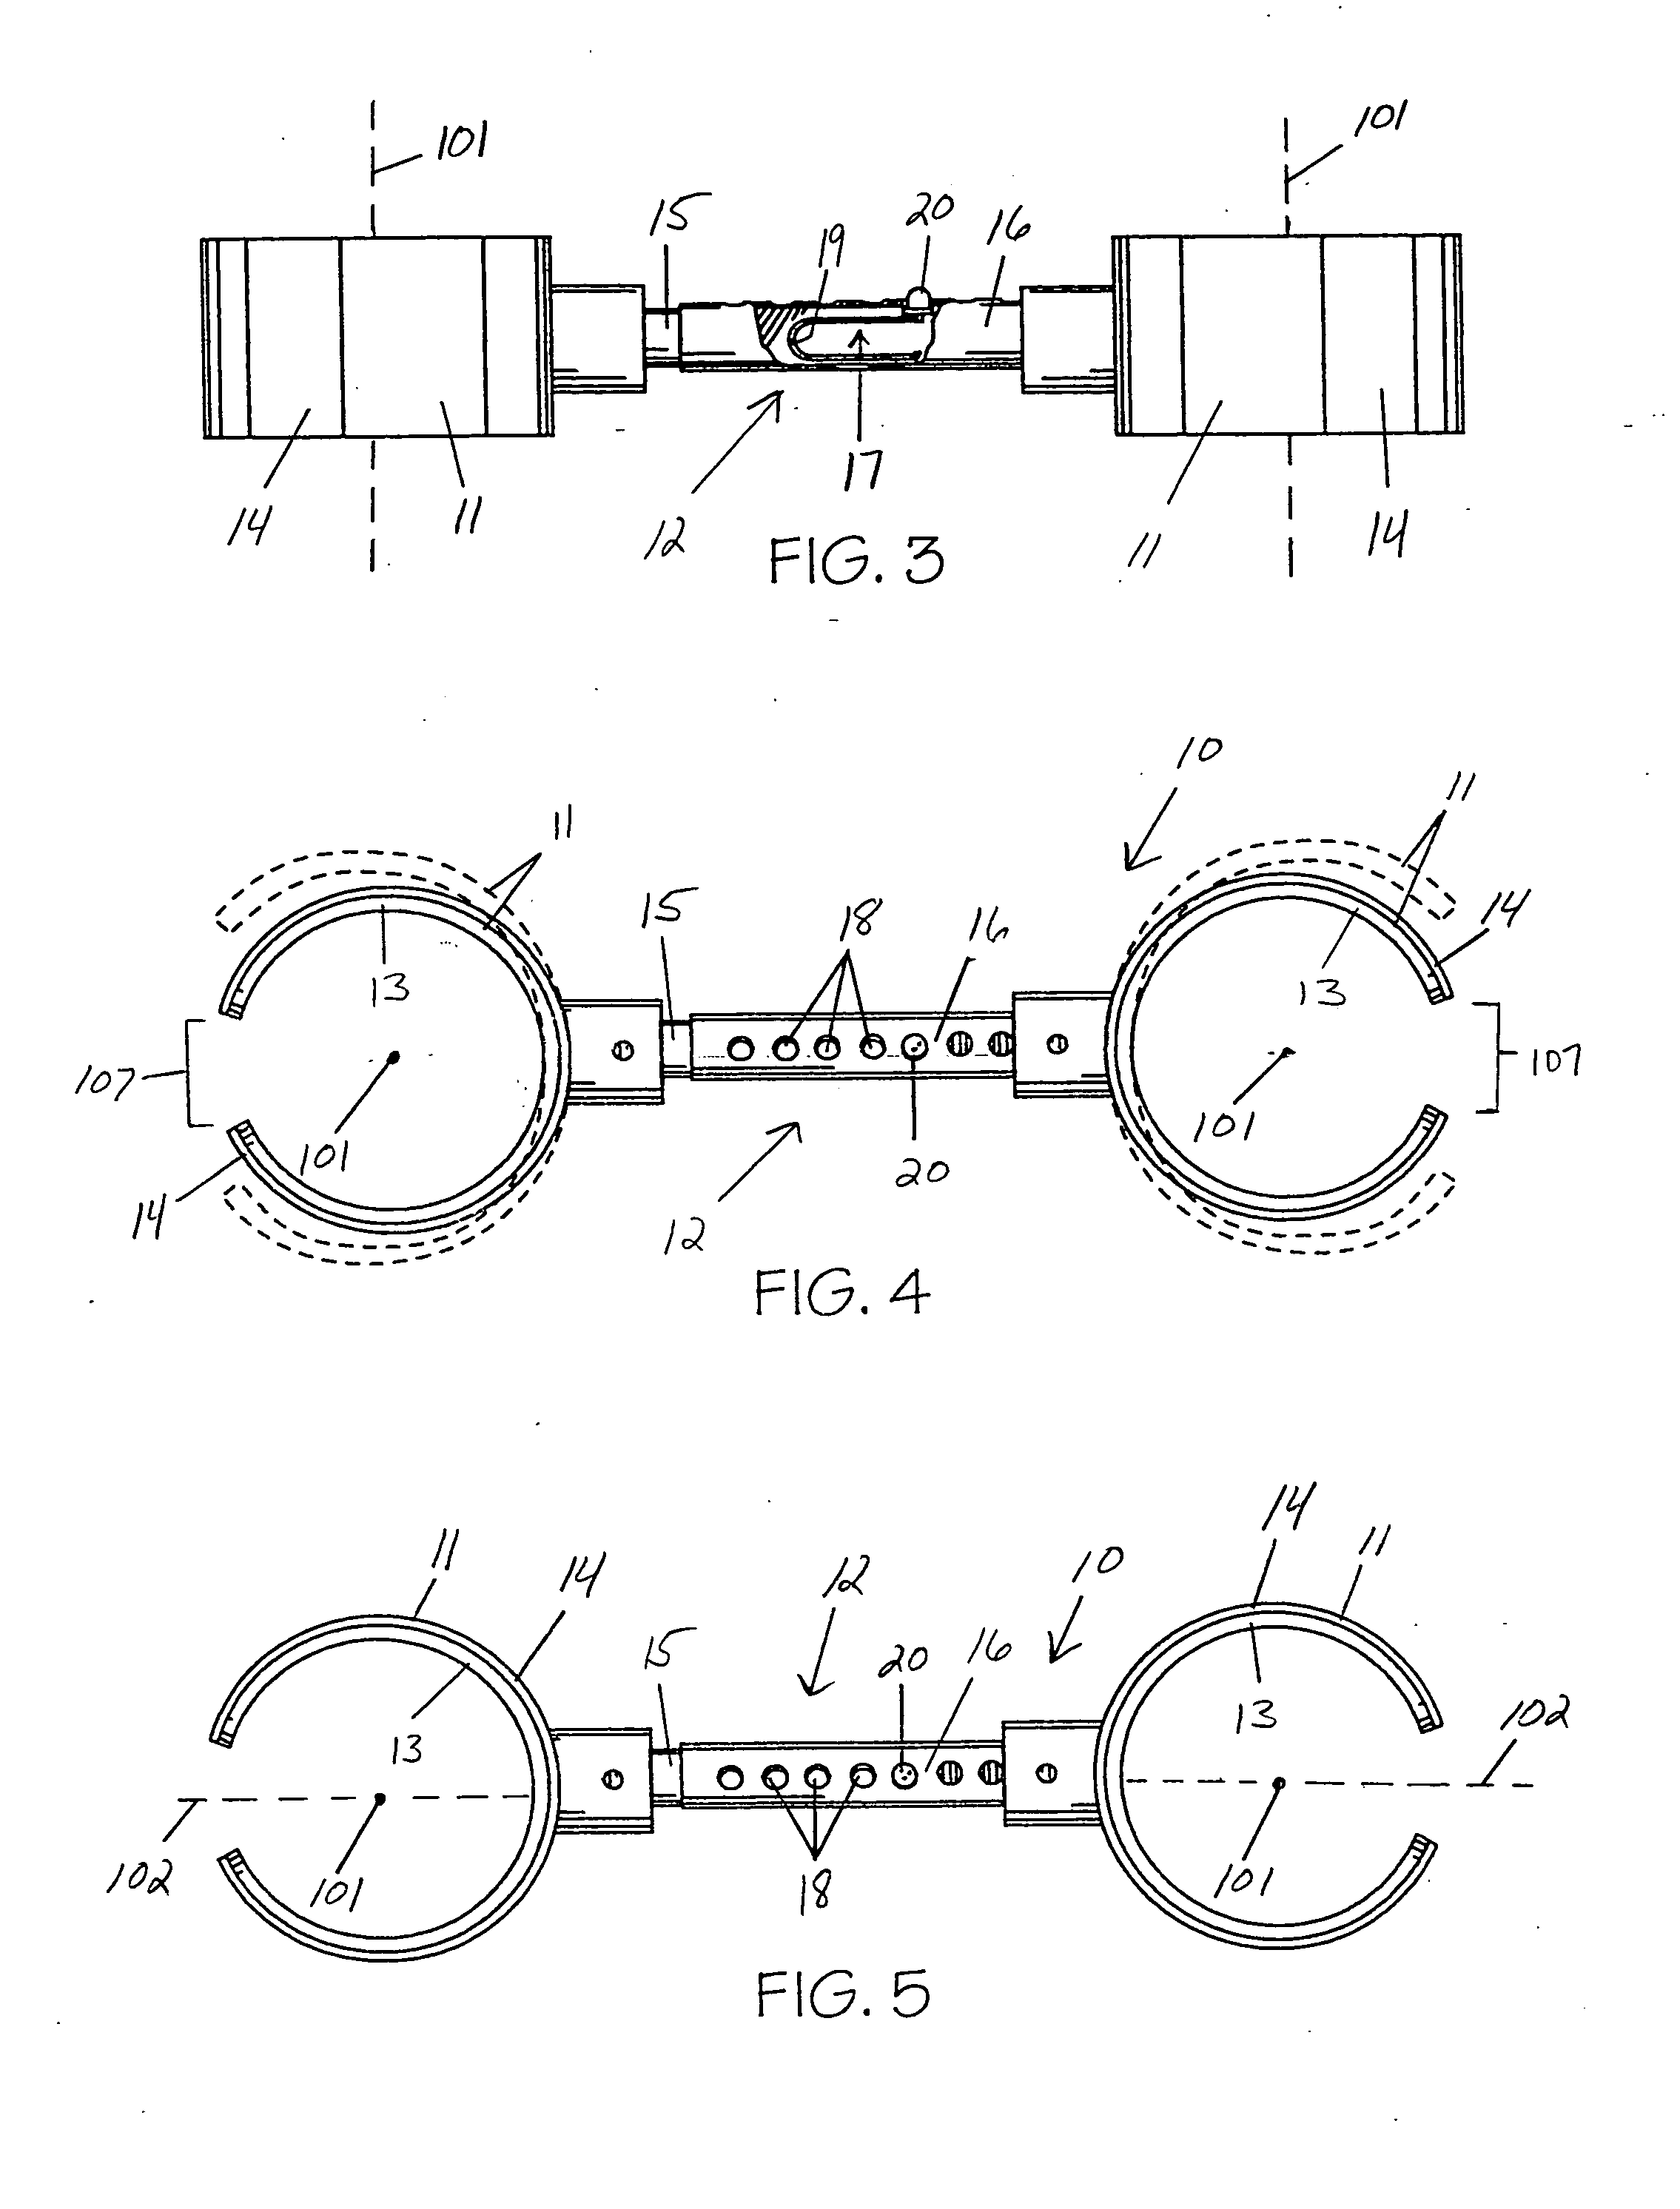 Golf swing connector training device and method